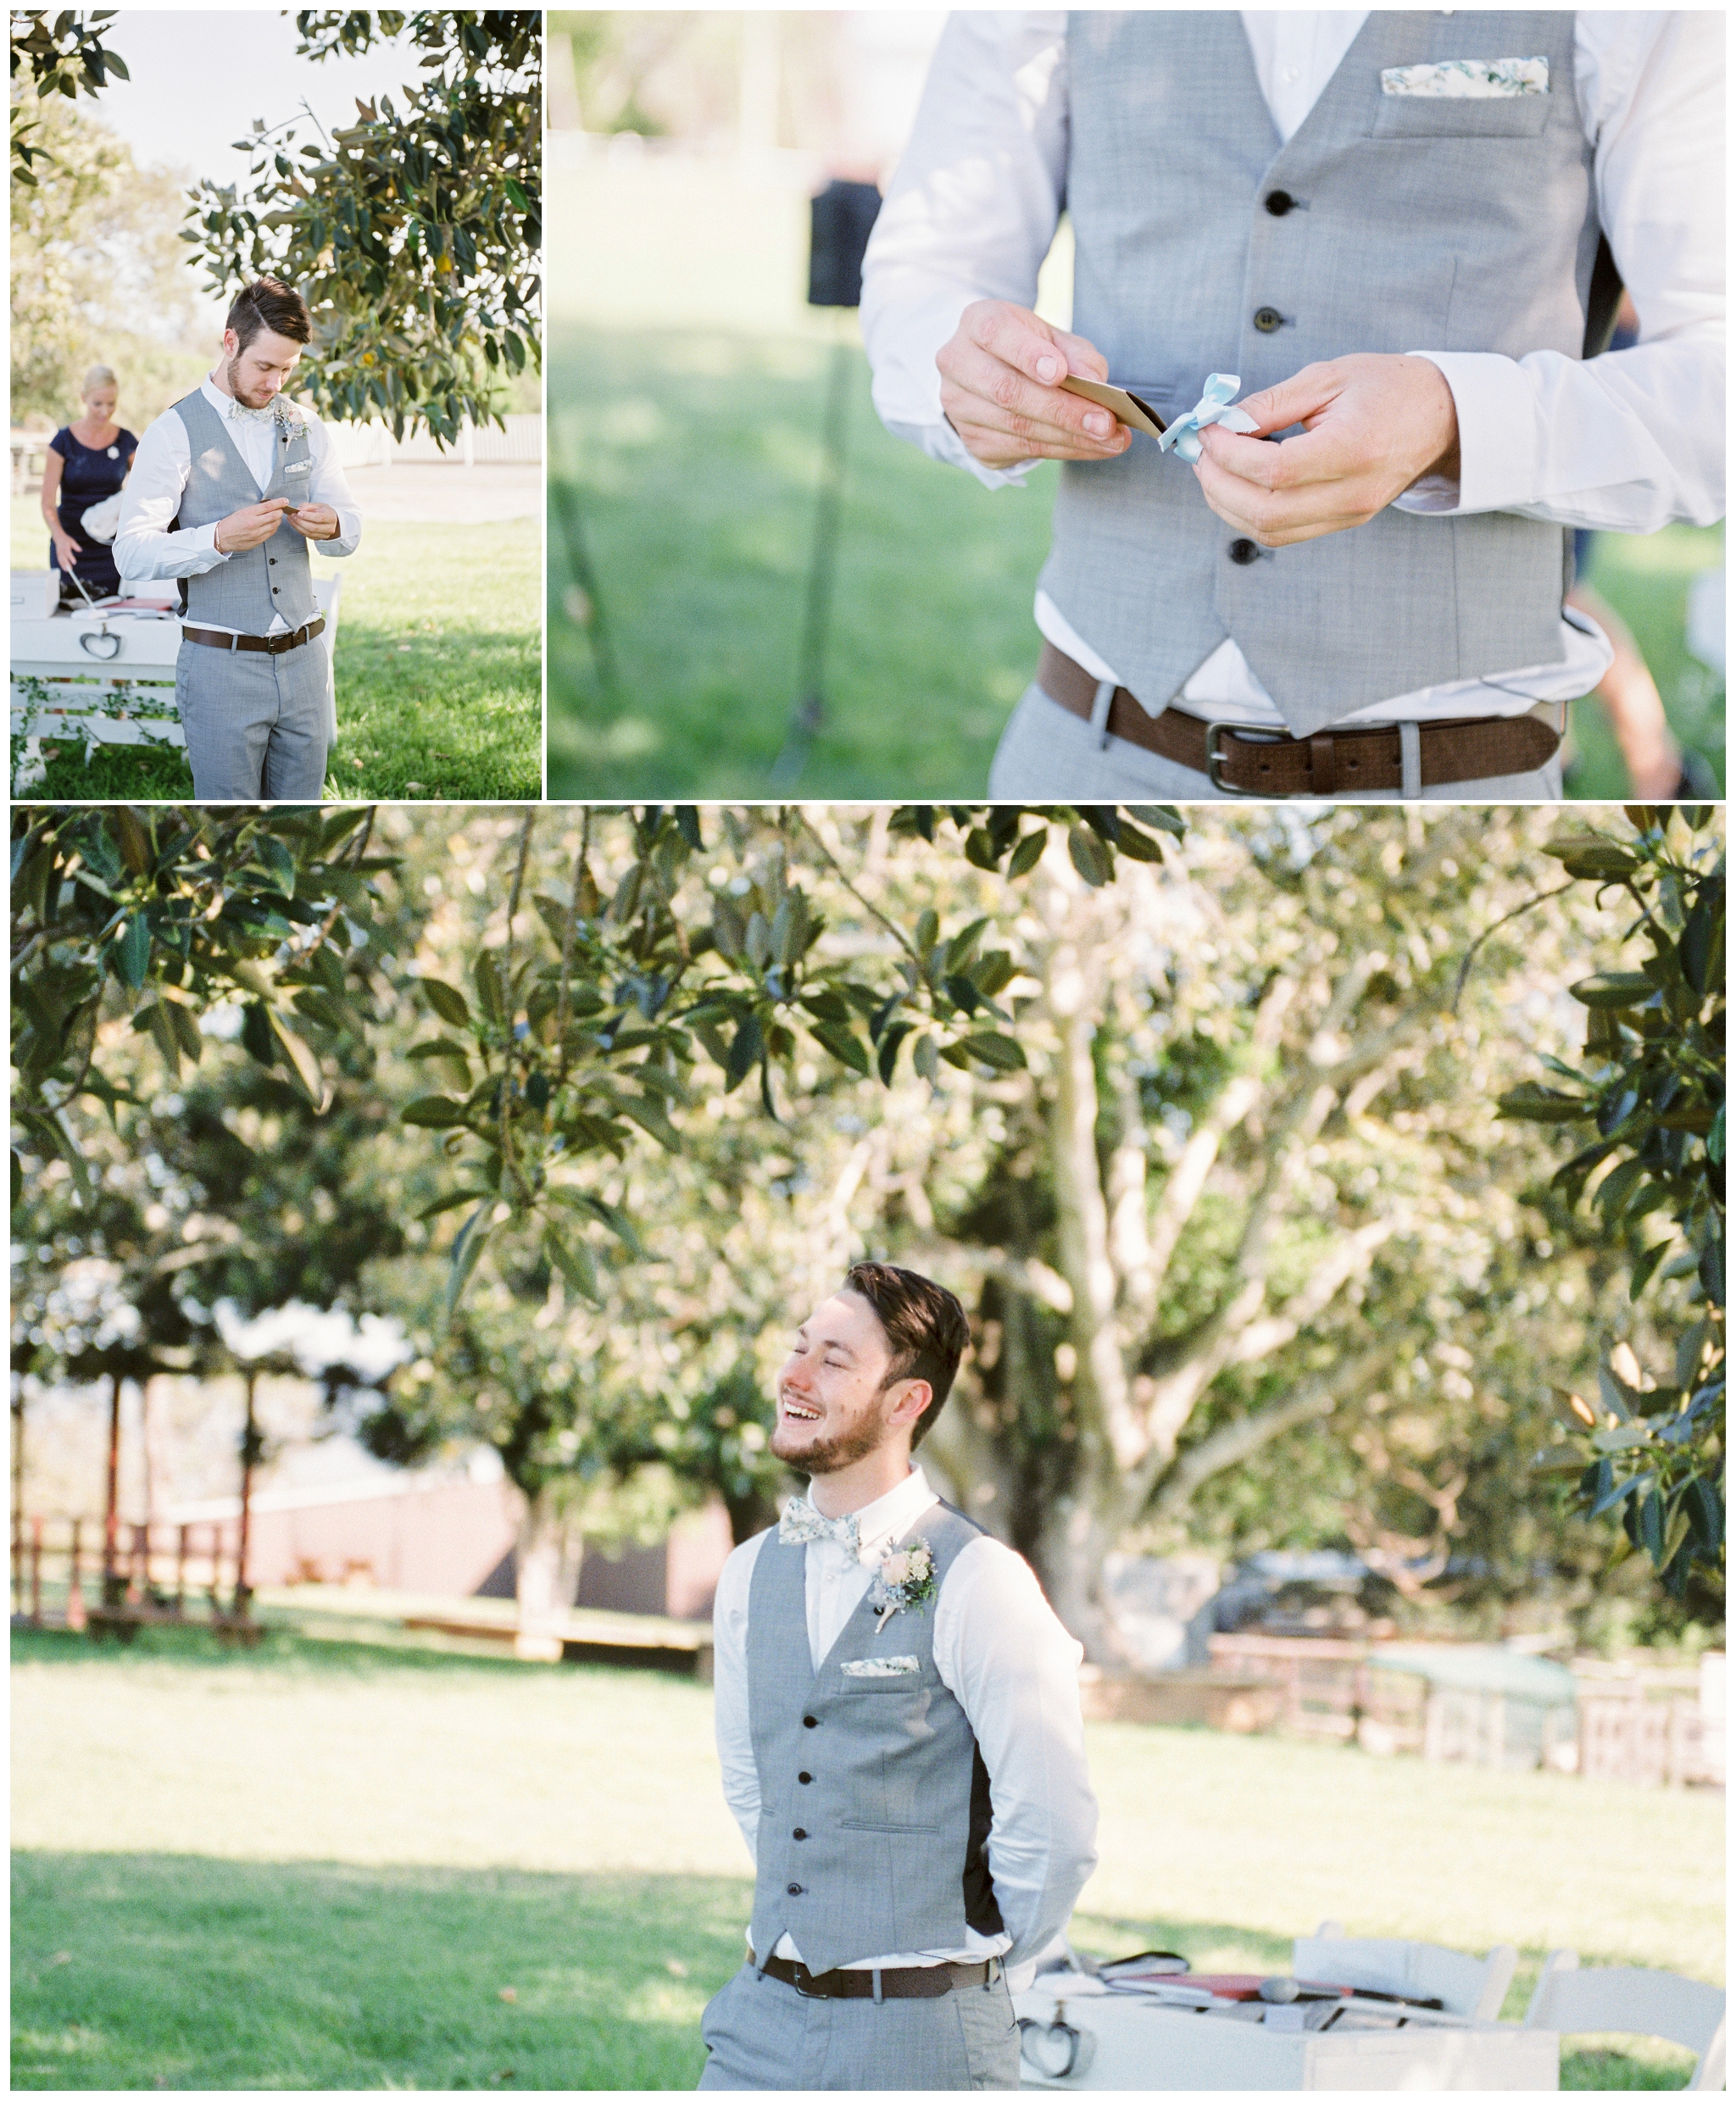 Tegan and Alex Wedding at Albert River Wines by Casey Jane Photography 26